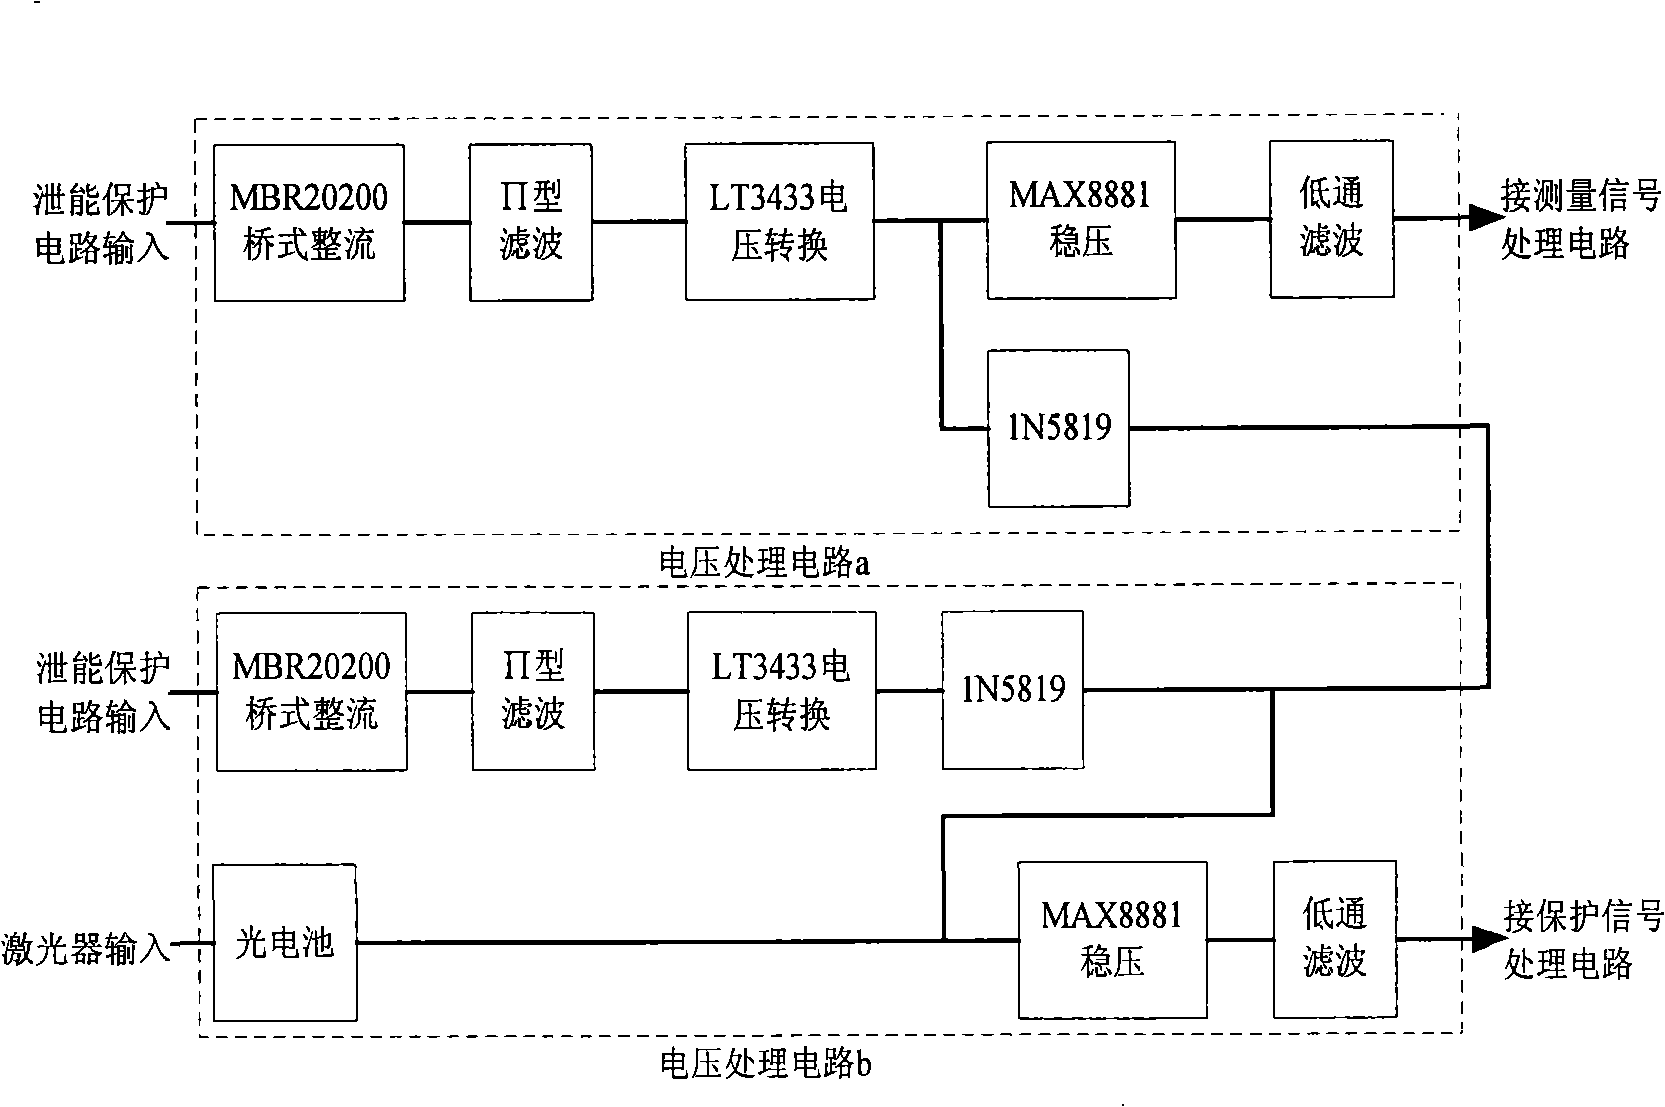 High potential side energy supplying device of active electronic type photoelectric current mutual inductor